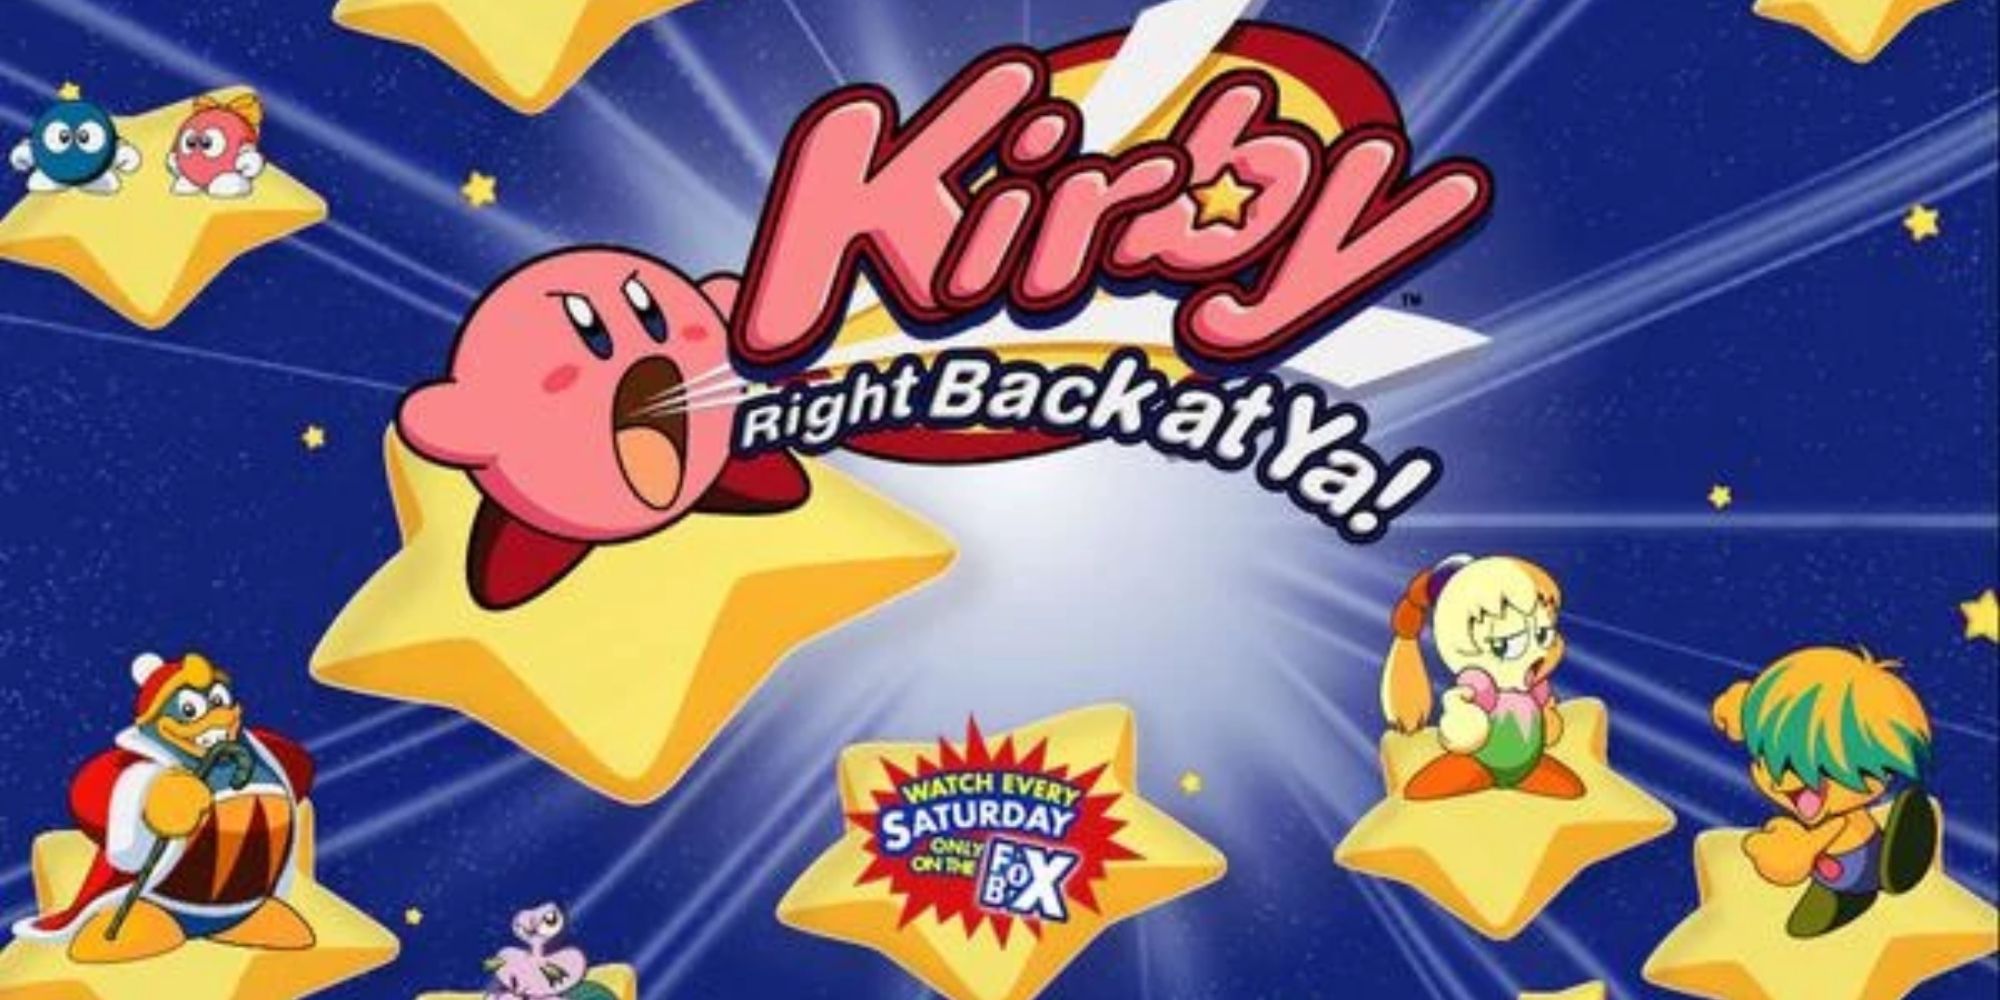 Promotional image for Kirby: Right Back At Ya!